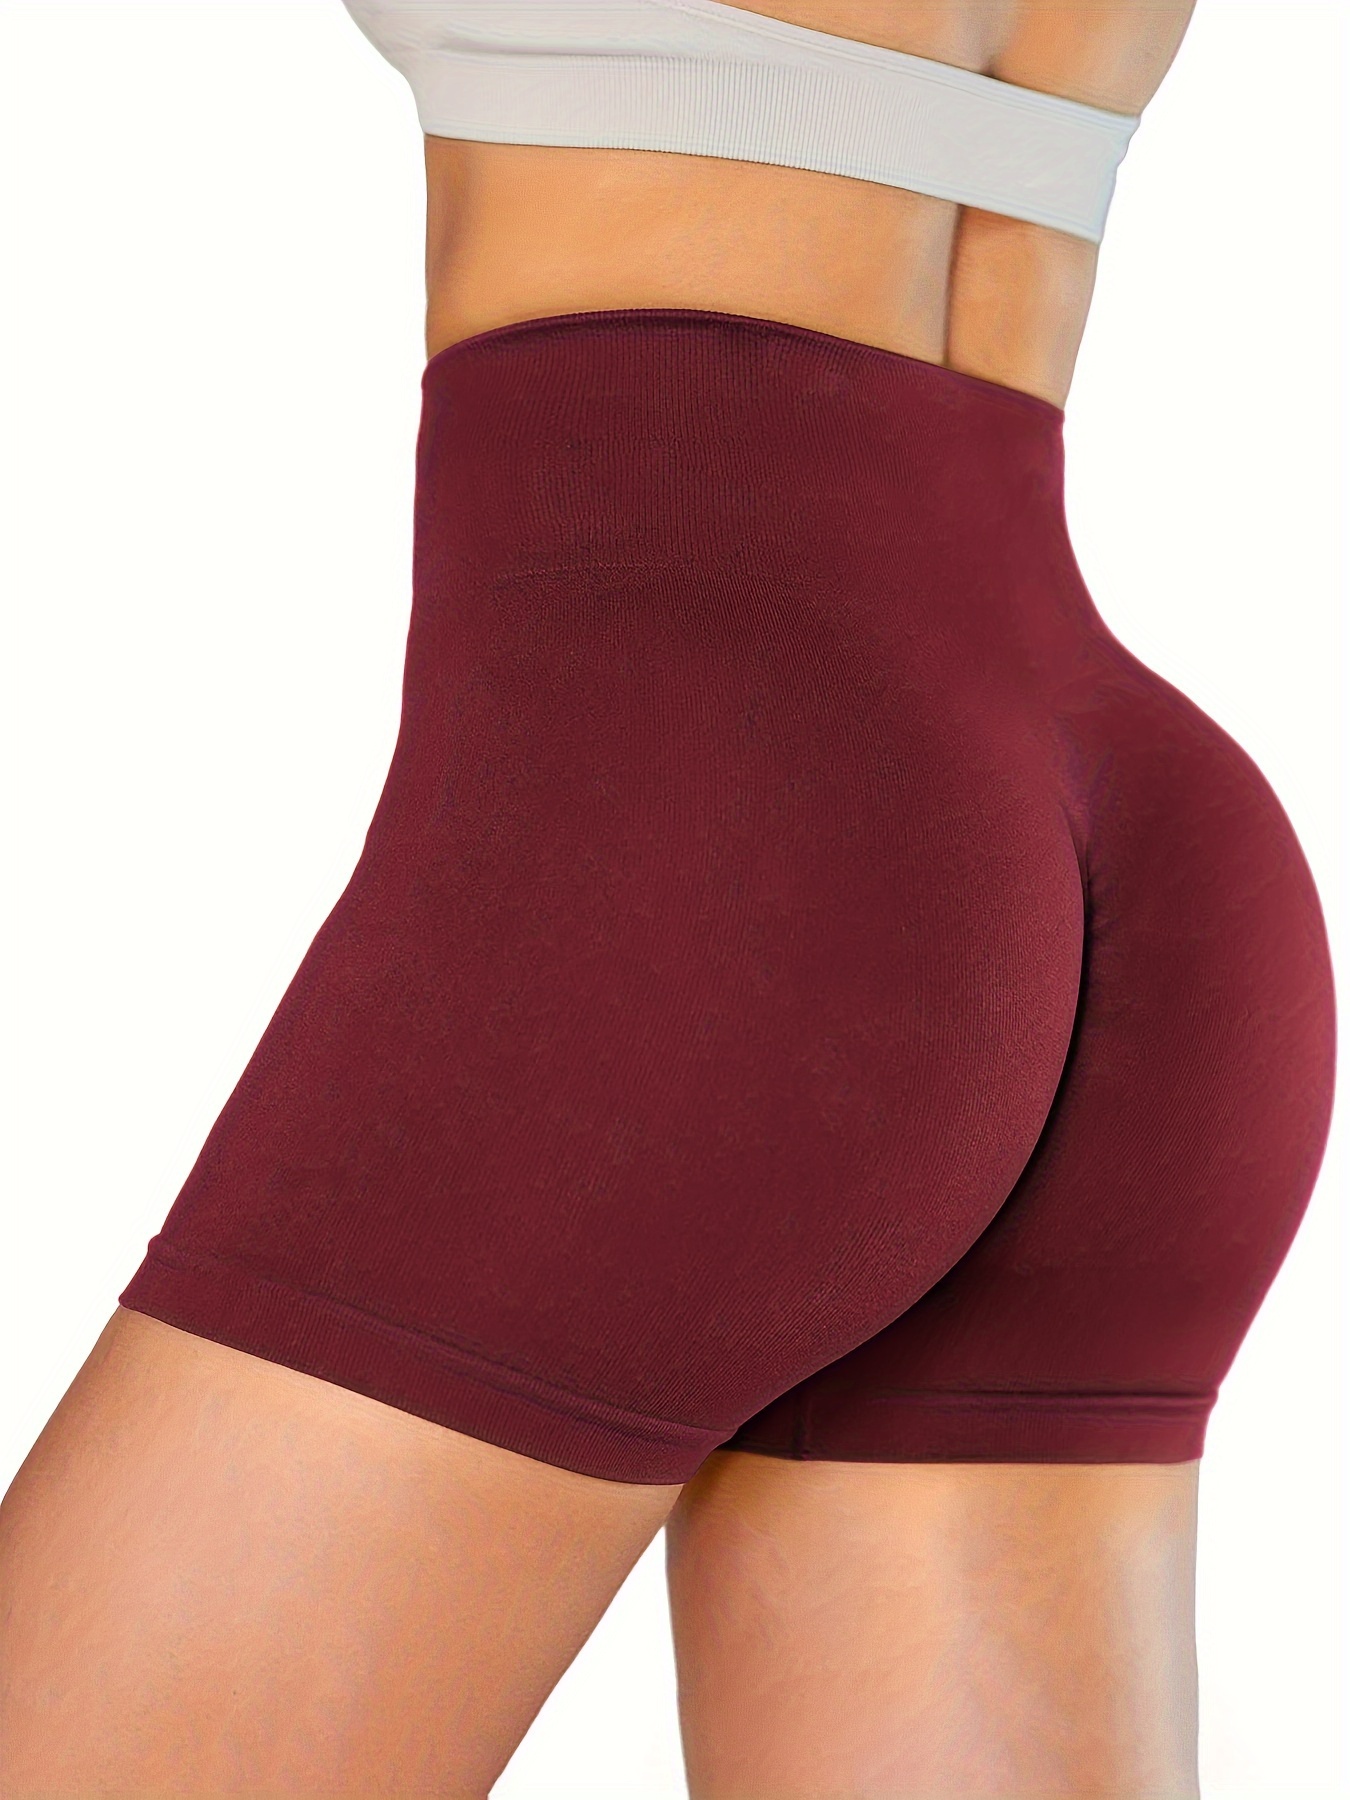 solid color quick drying yoga workout shorts high stretch sports running shorts womens activewear details 19